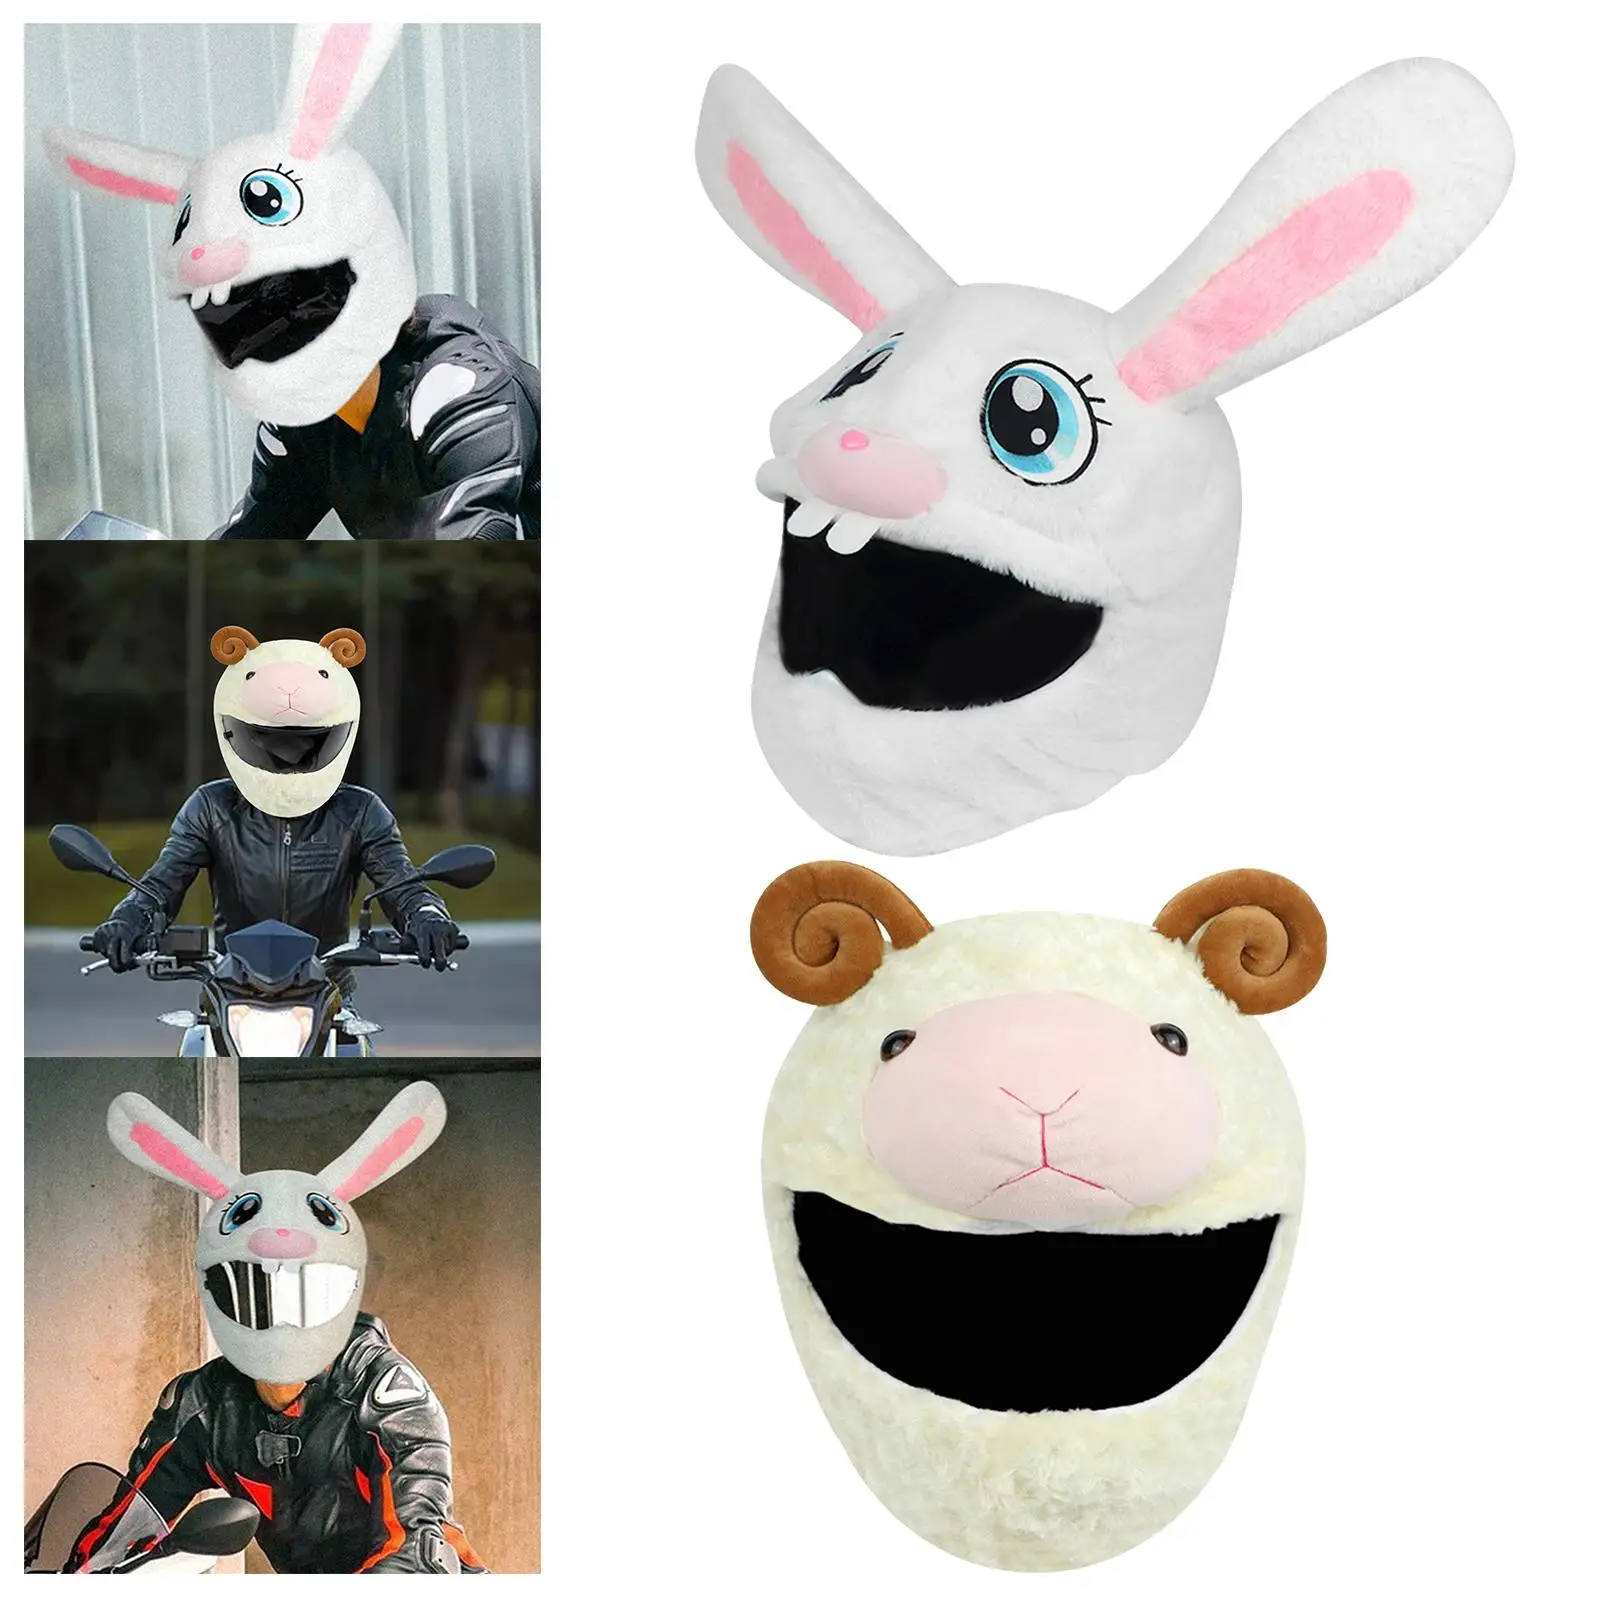 Cover Sleeve for Full Faces Motorbike Plush Funny Cover